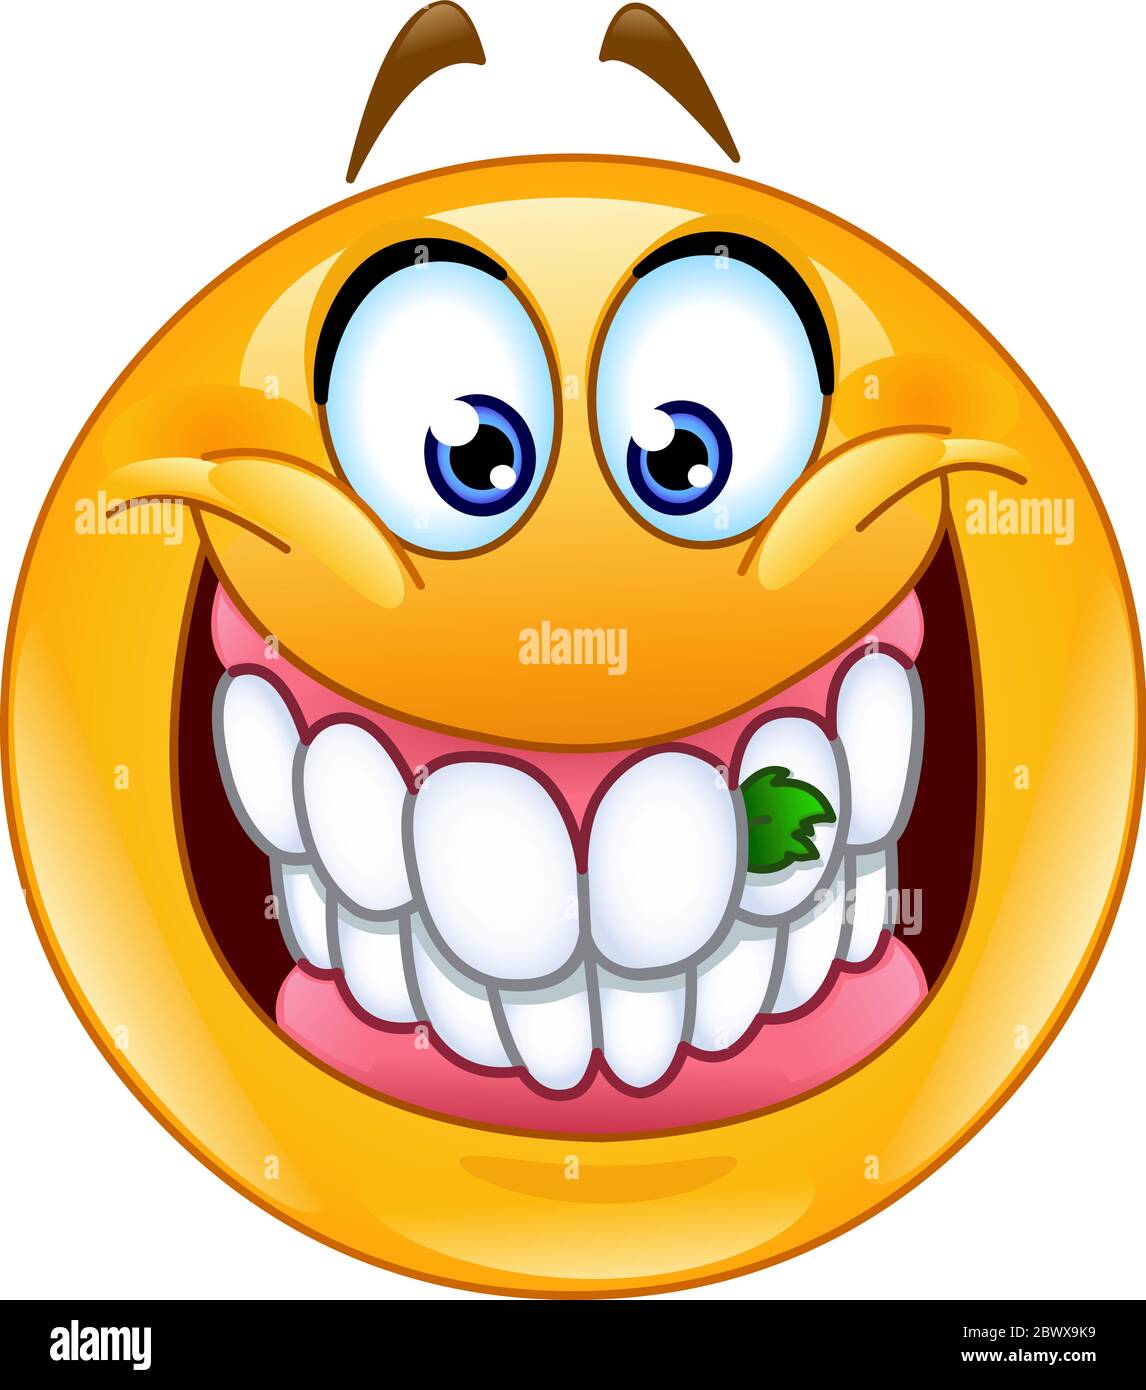 Smiling emoticon with food stuck between its teeth, something in its teeth. Stock Vector